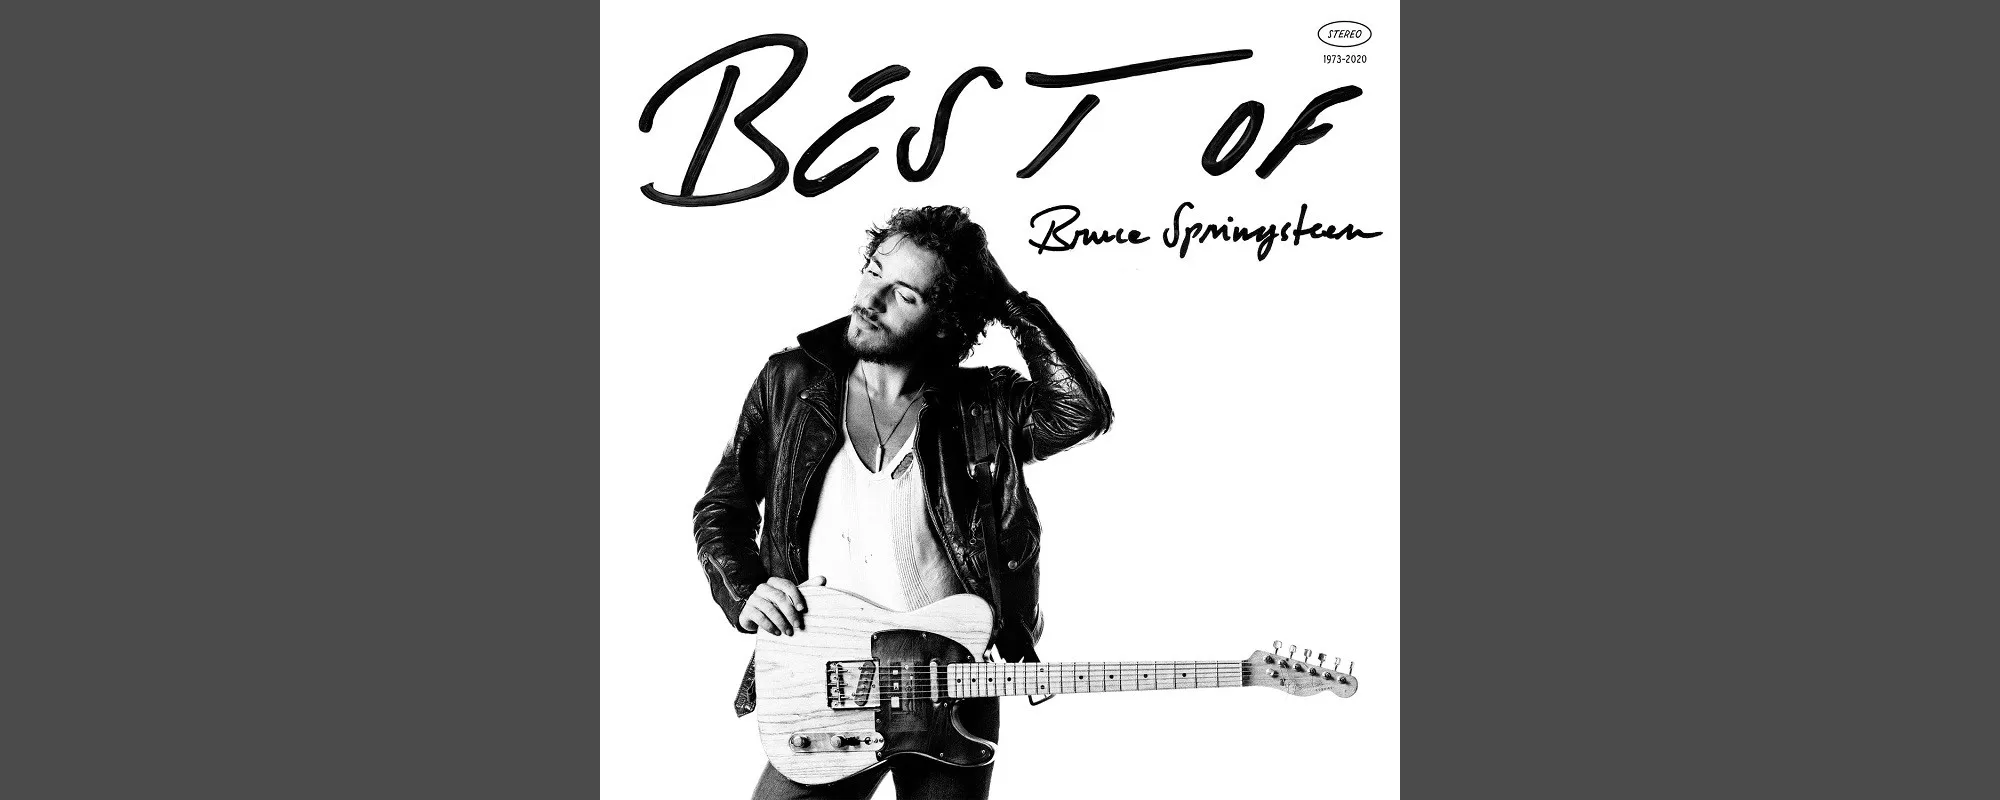 Best of The Boss: New Career-Spanning Bruce Springsteen Compilation LP Due Out in April